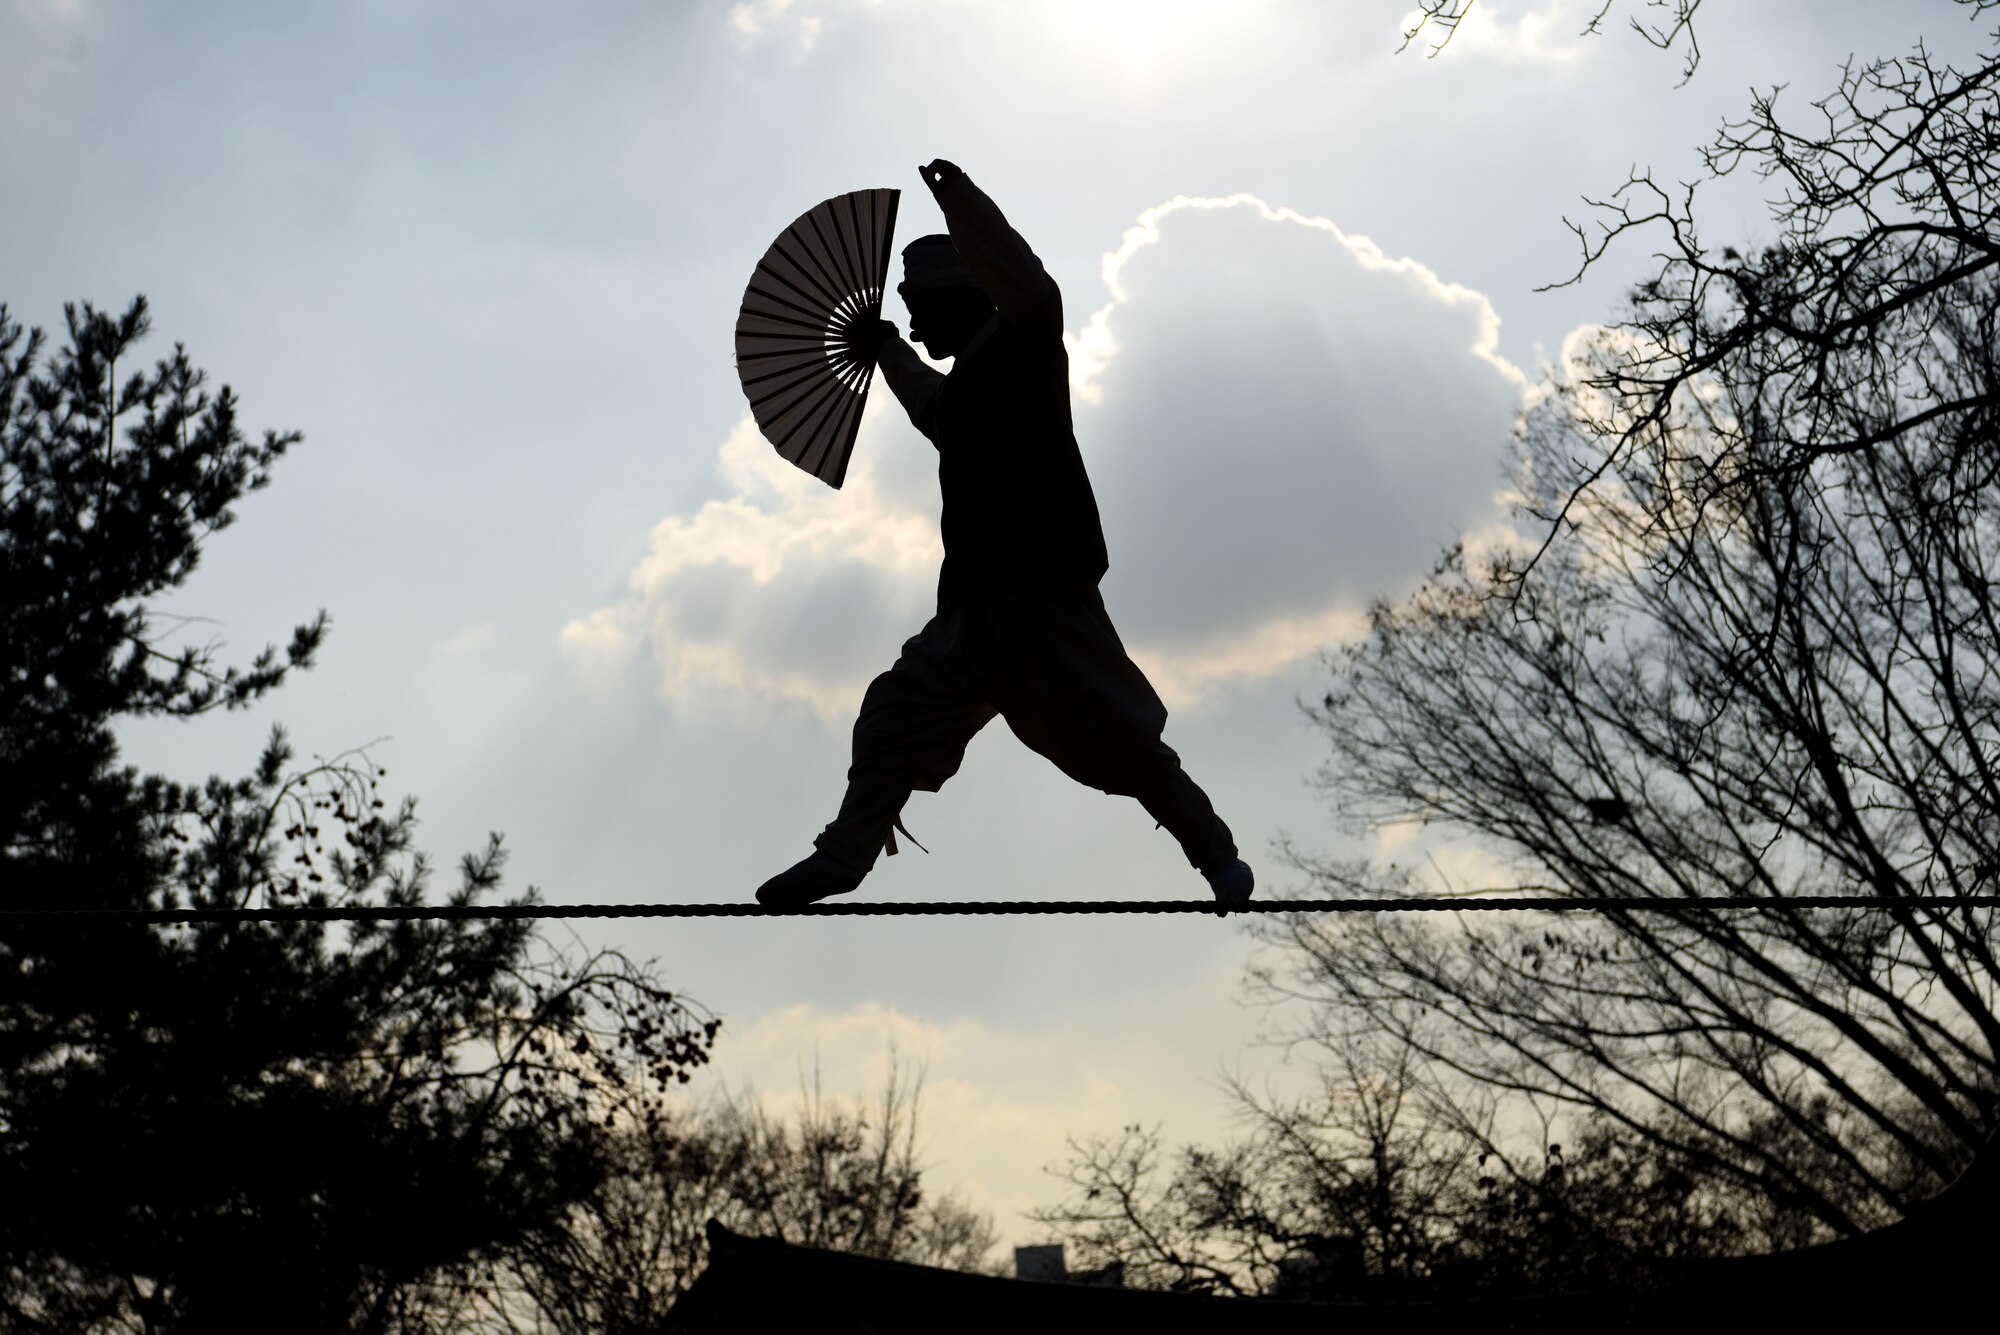 A performer showcases acrobatics on a tightrope at the Korean Folk Village, Yongin, Republic of Korea, Nov. 13, 2018. The Korean Folk Village was the last stop of the Head Start Program, which included two days of informational classes and hands-on experiences around the Gyeonggi Province of South Korea. (U.S. Air Force photo by Senior Airman Kelsey Tucker)